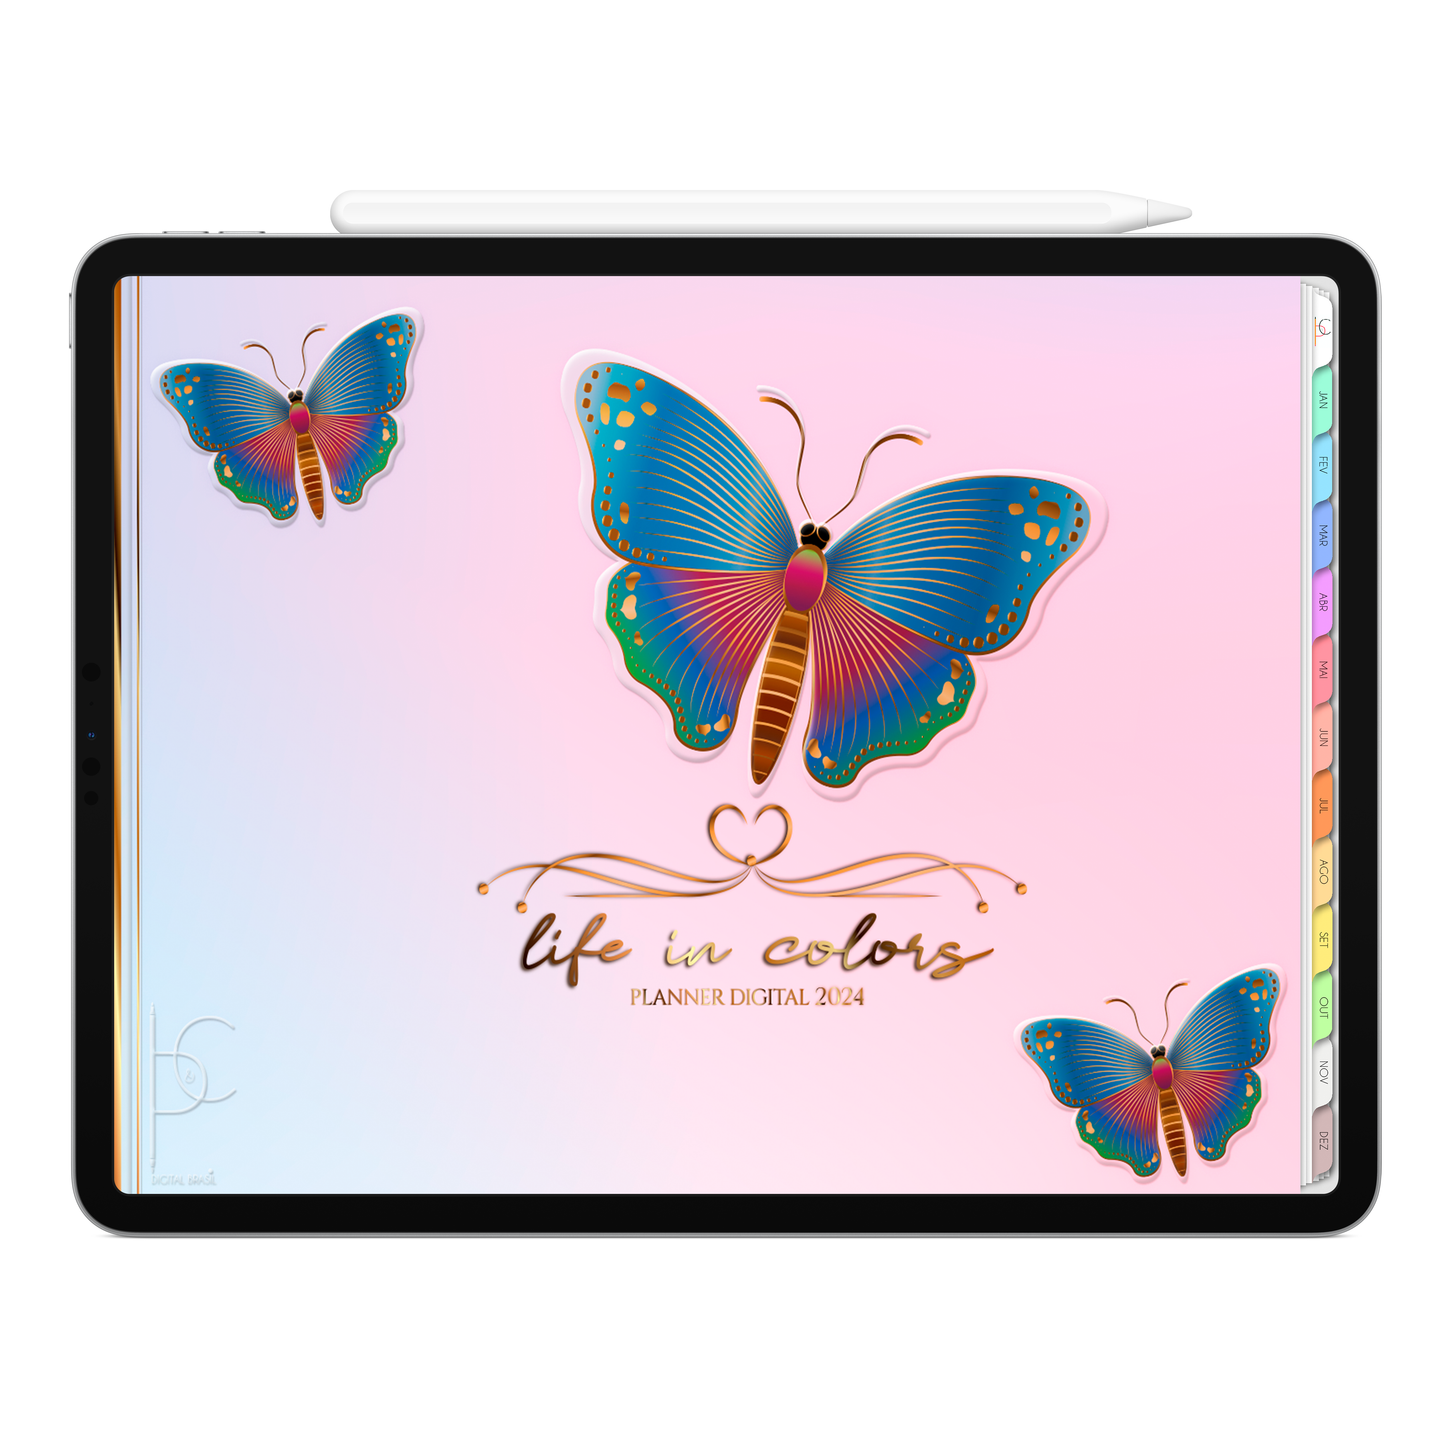 Planner Digital Horizontal Life In Colors 2024 Blue Butterflies • Para iPad e Tablet Android • Download Instantâneo • Sustentável